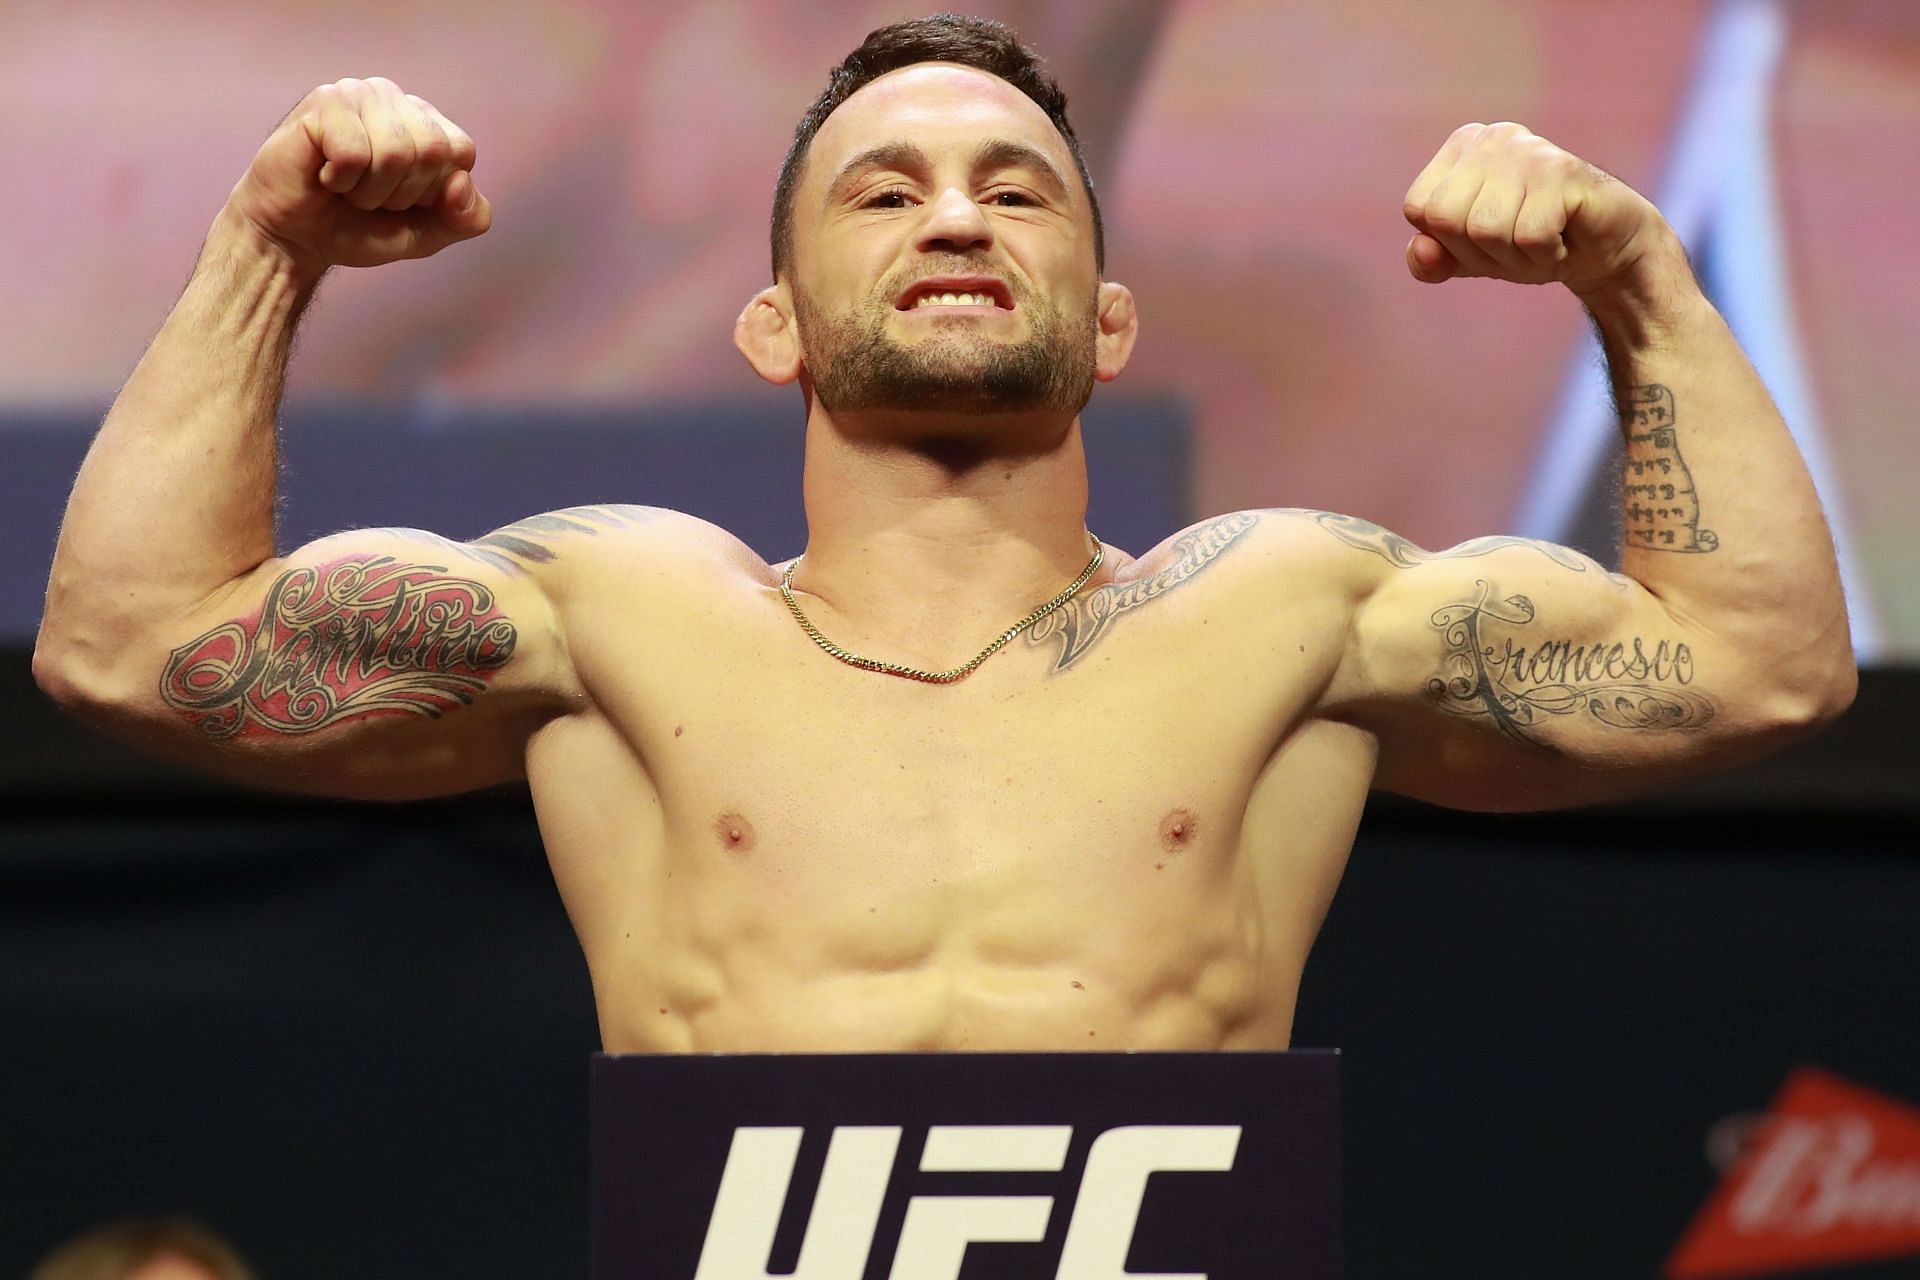 Frankie Edgar wrote himself into UFC lightweight legend with two wins over BJ Penn